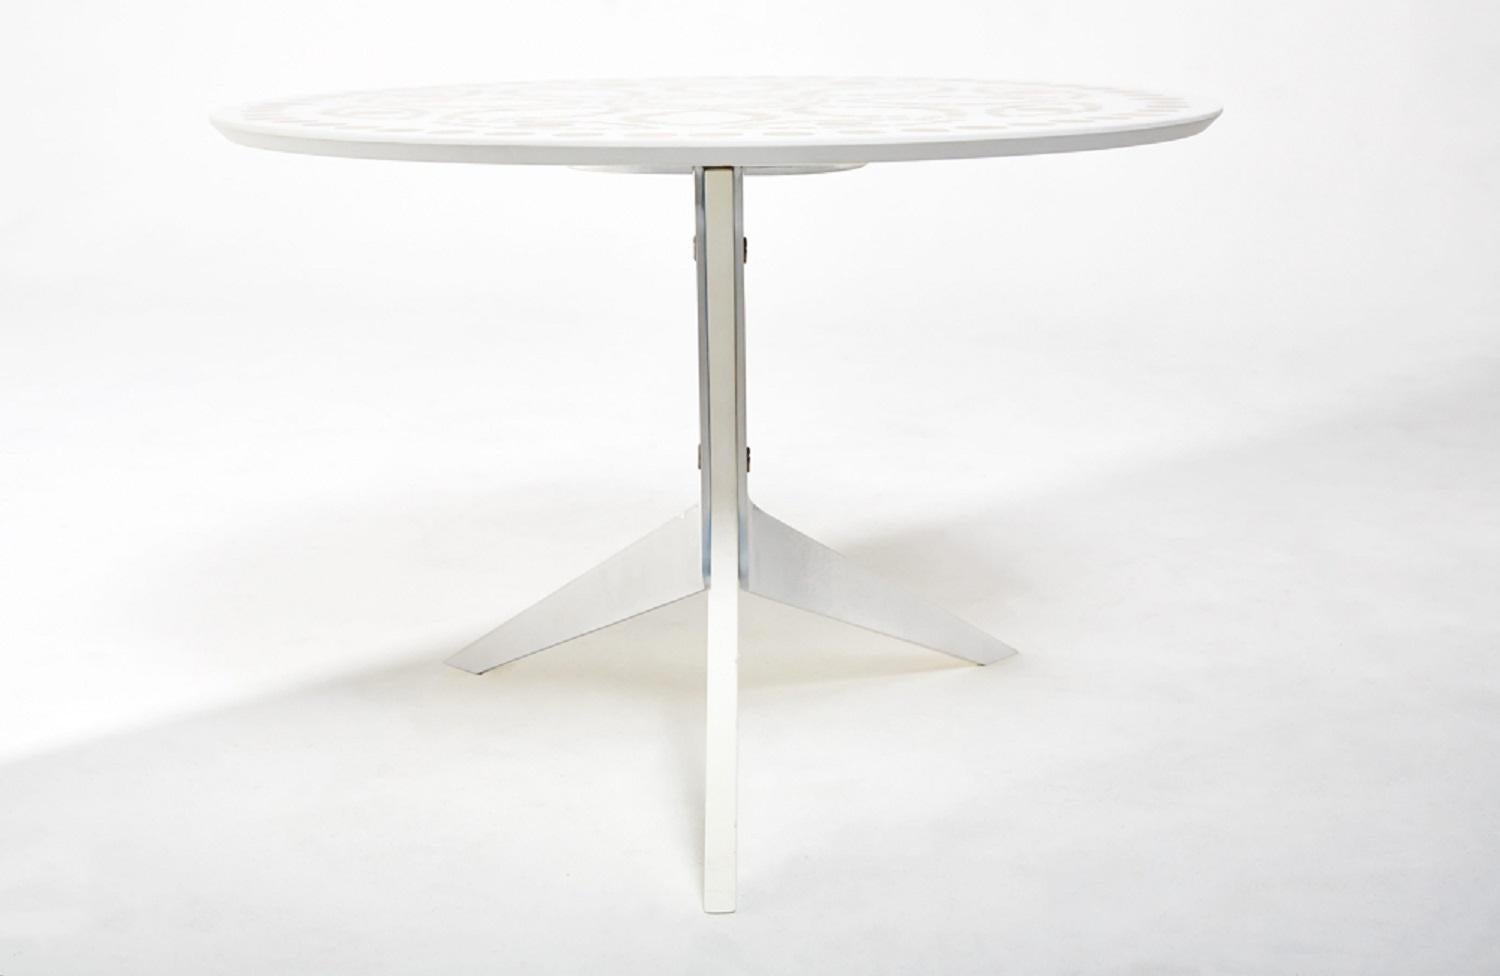 Iris end table features top in various fruitwood end-grain embedded in ABDB cloud white resin. Sculptural base consists of two stainless steel legs paired with a single cloud white resin leg.

Size: 23’’ top diameter x 17” height.

Handmade by